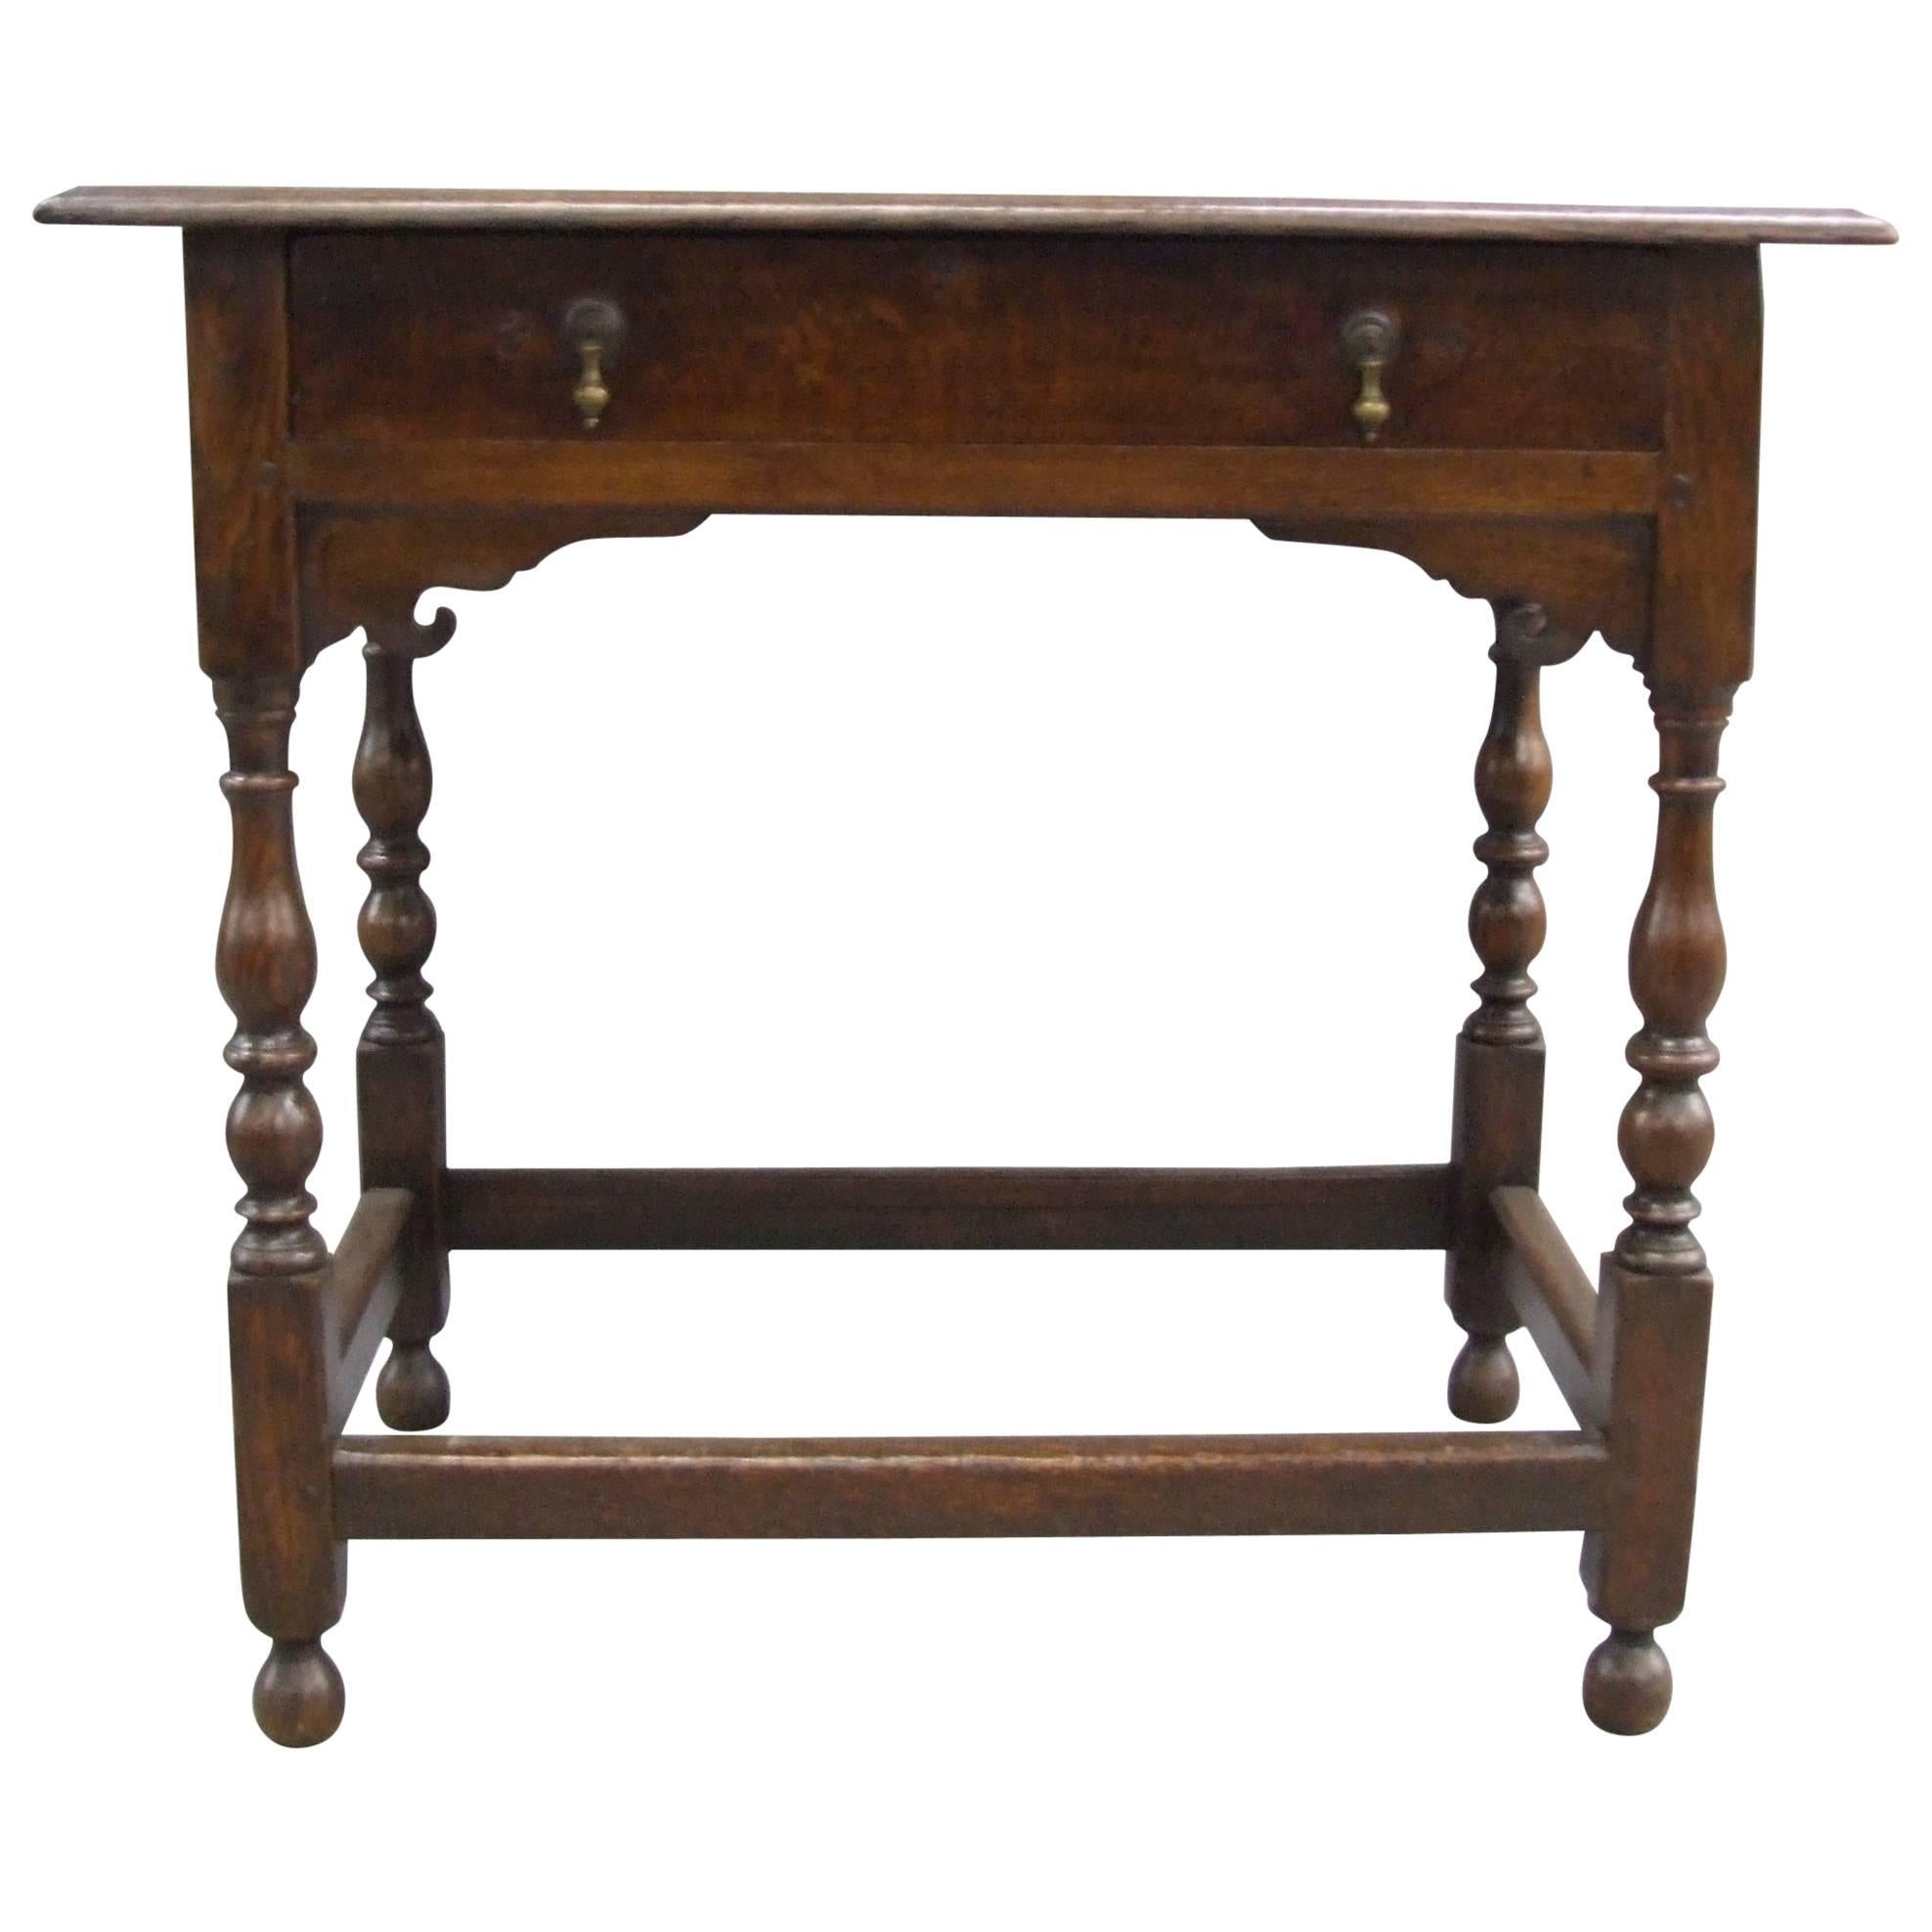 Early 18th Century English Oak Side Table